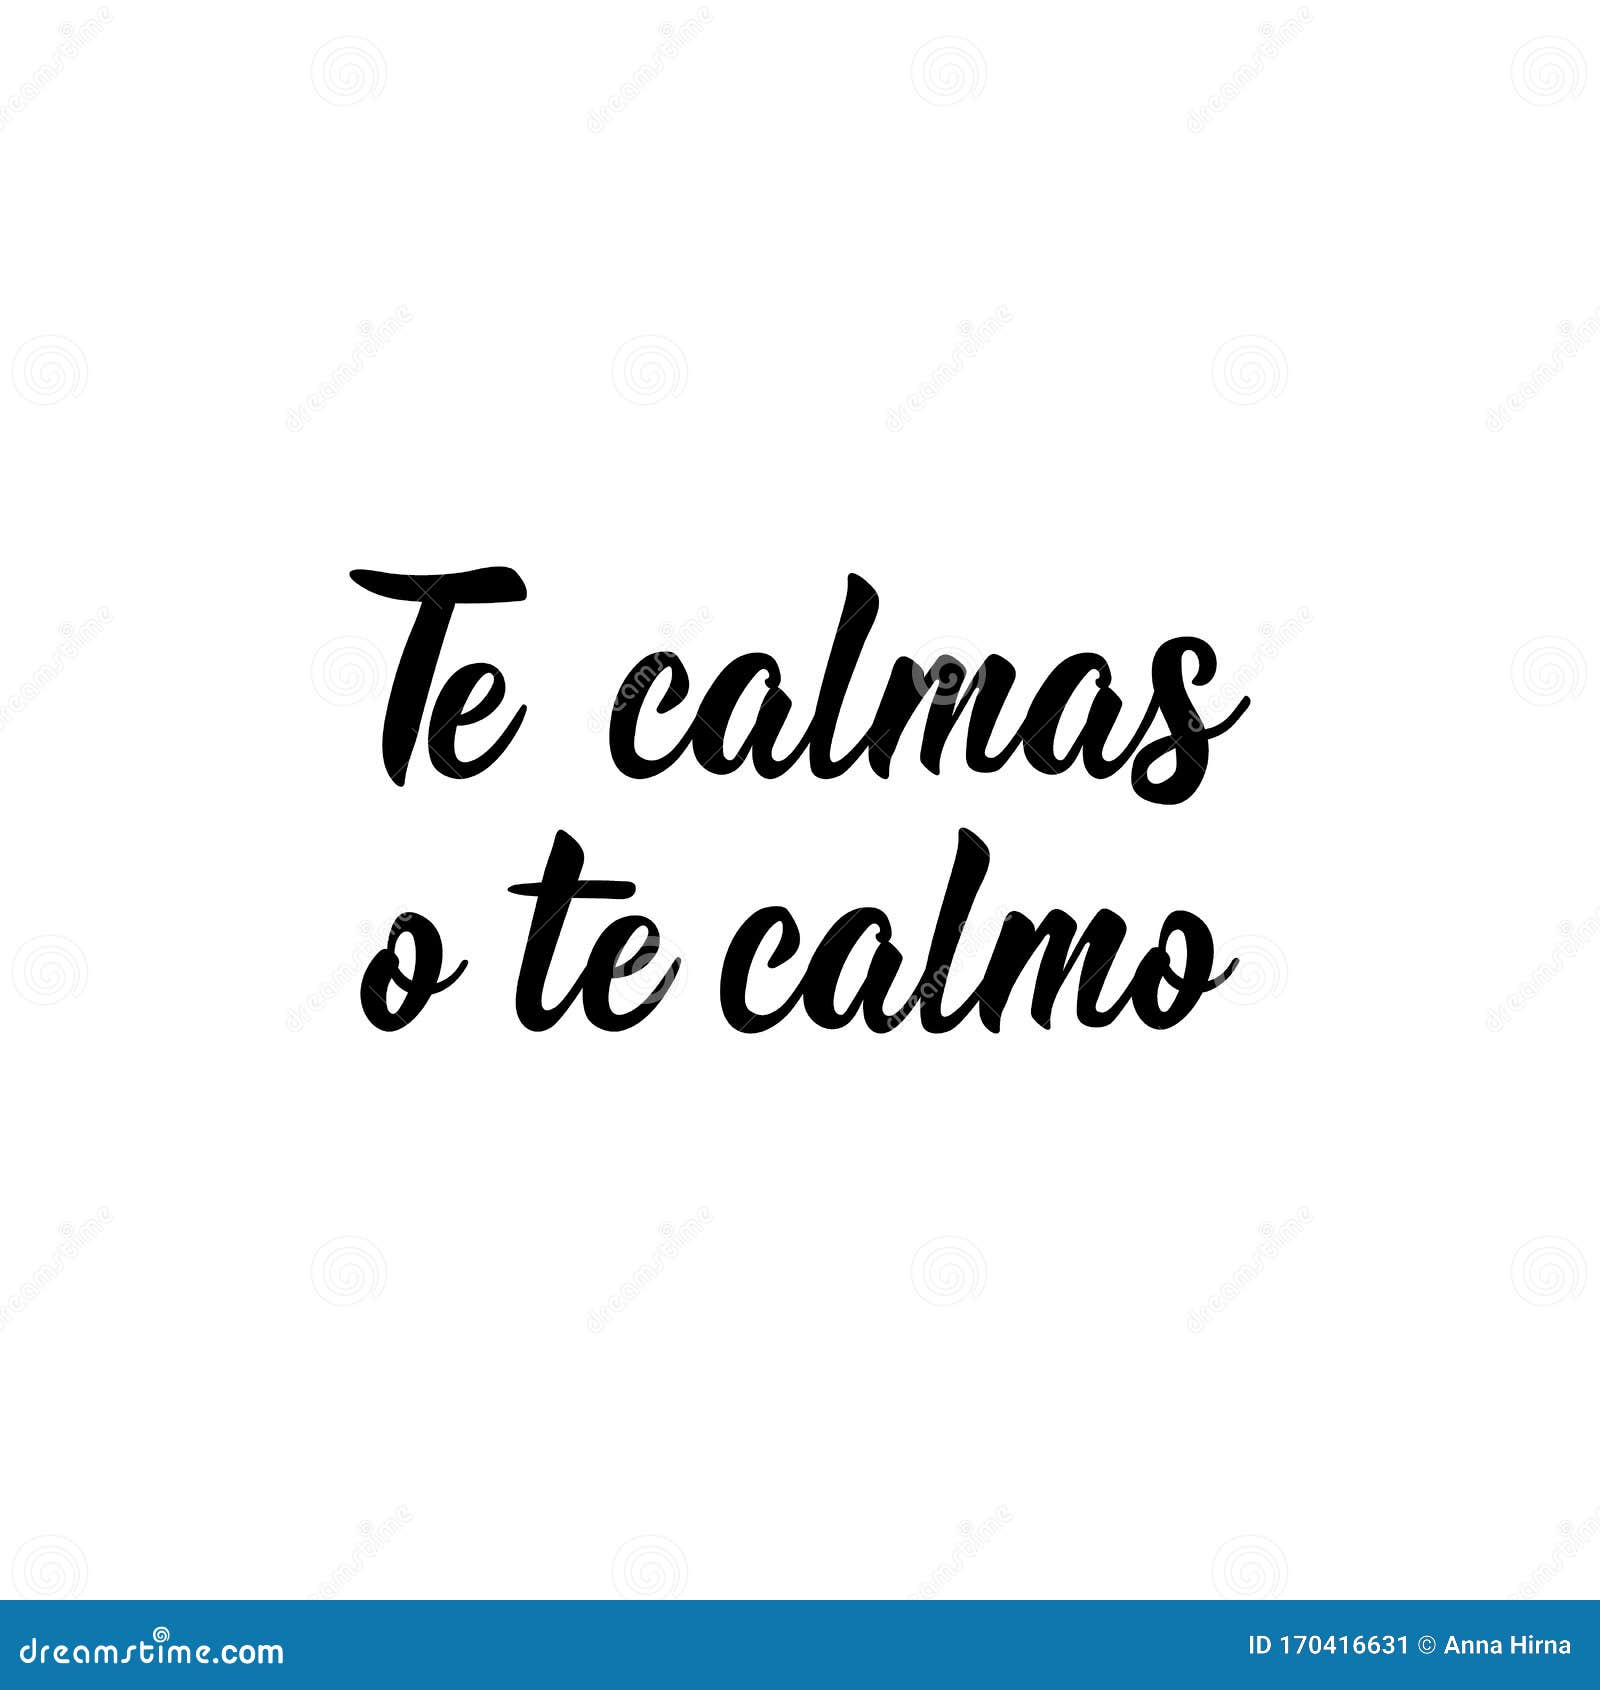 you calm down or i calm you down - in spanish. lettering. ink . modern brush calligraphy